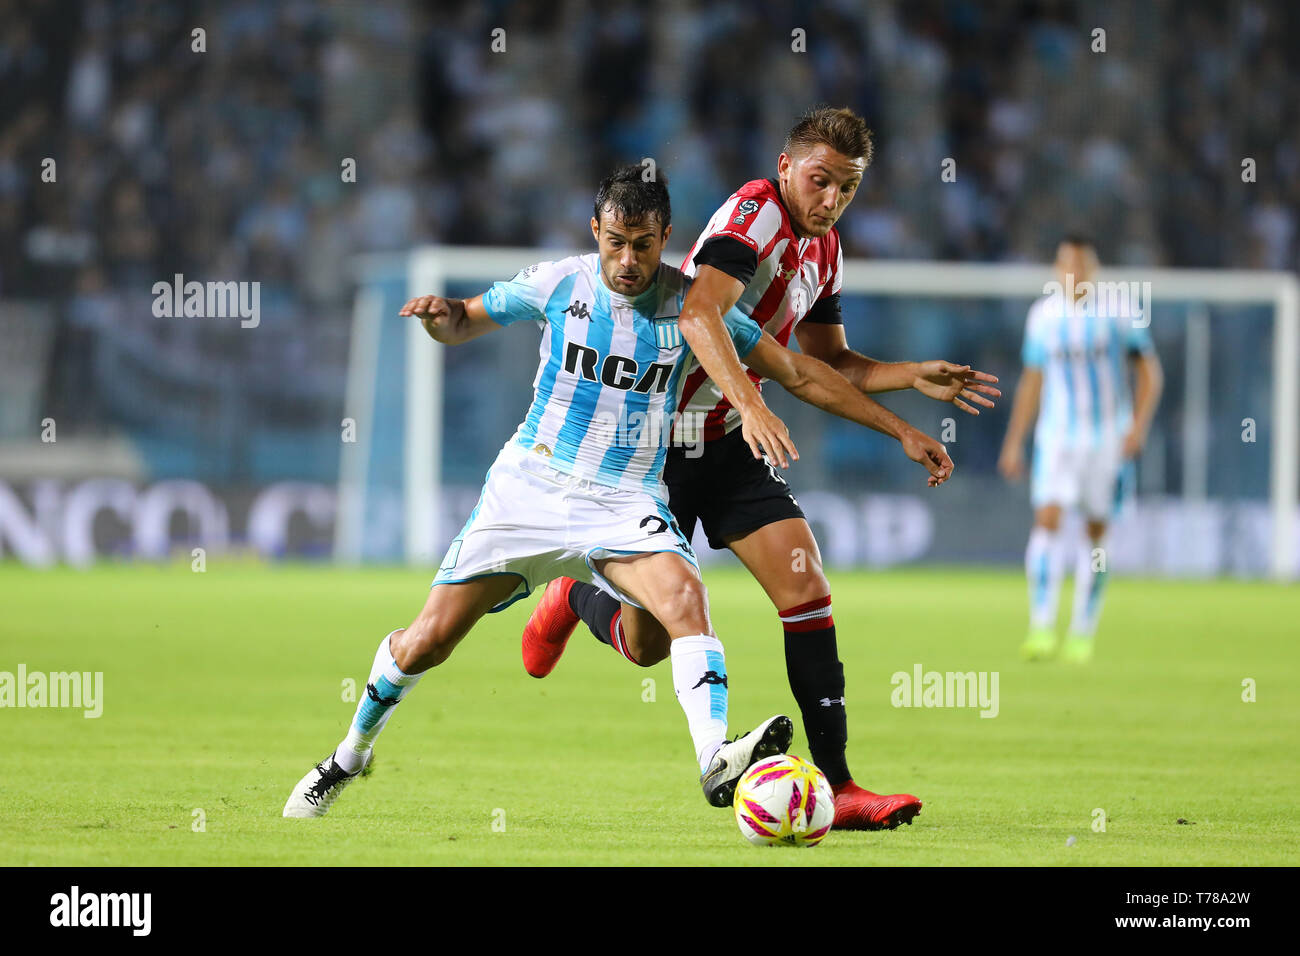 Buenos Aires, Argentina - May 04, 2019: Dario Cvitanic (Racing) holding the ball against the Estudiantes LP defense in Buenos Aires, Argentina Stock Photo